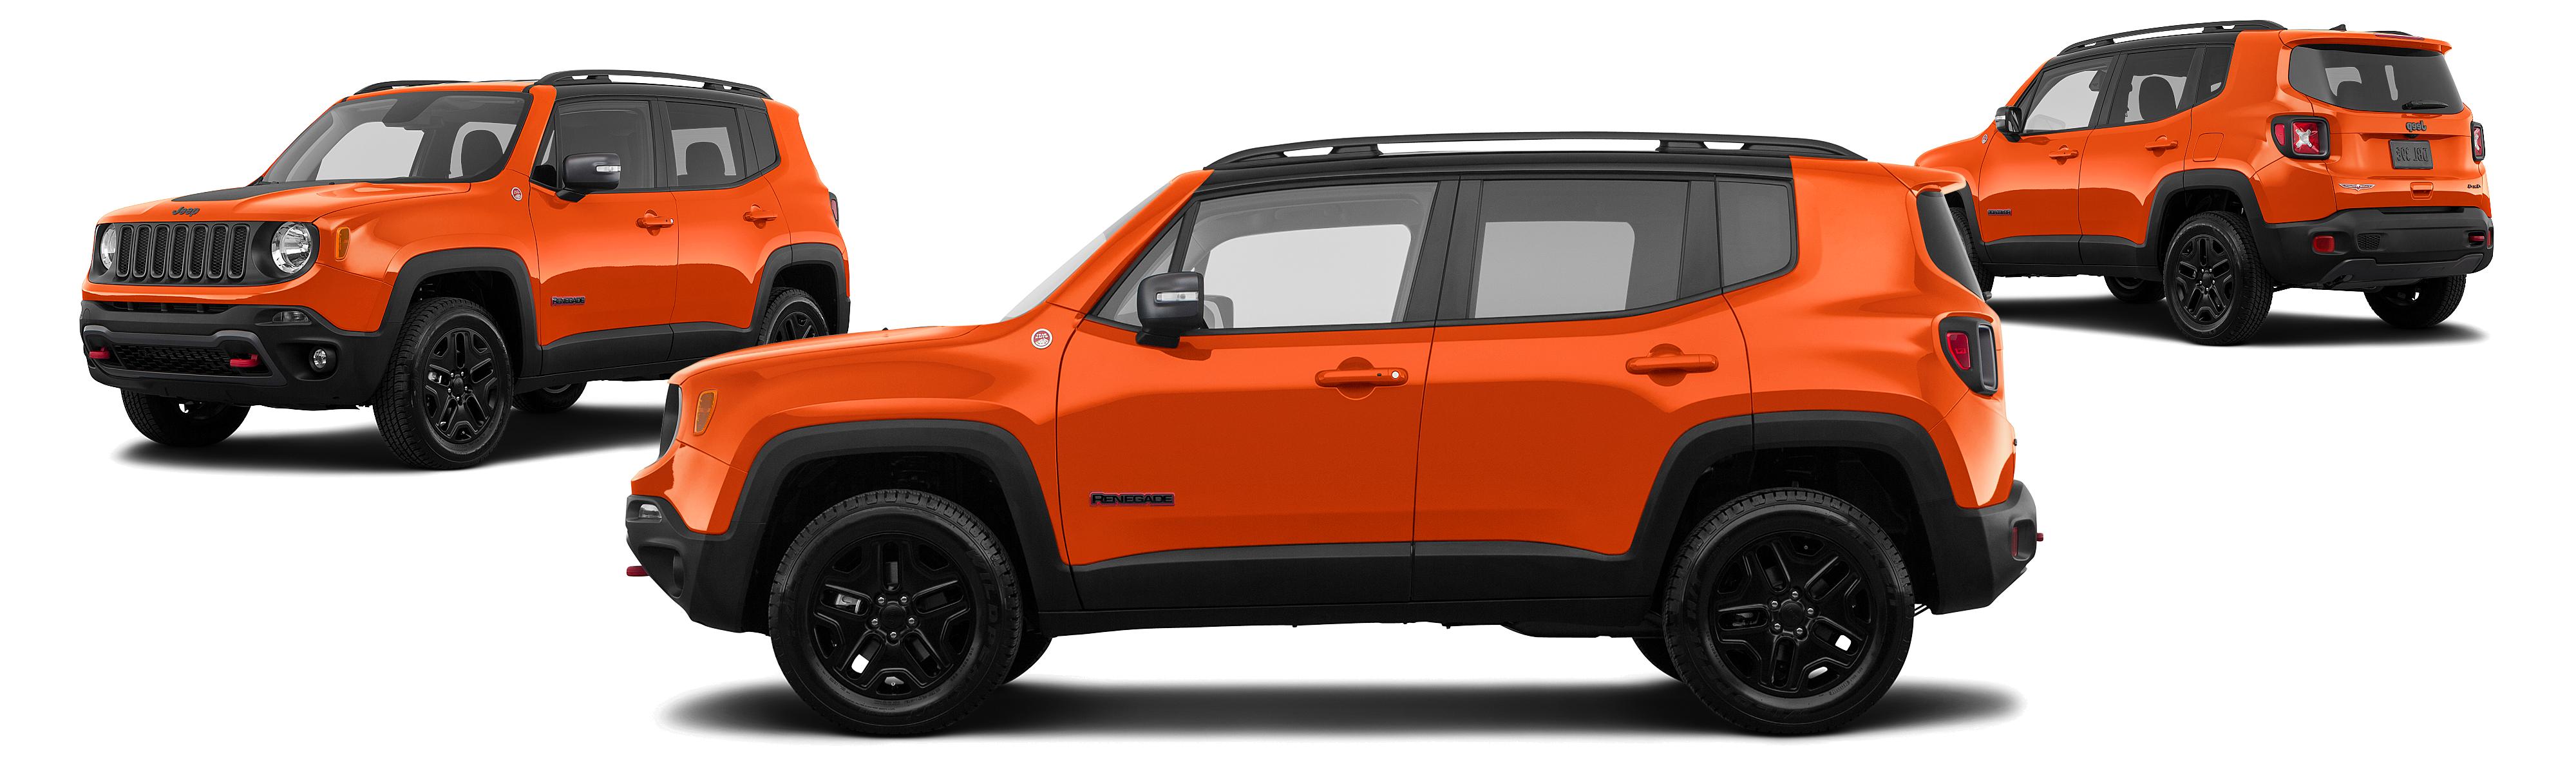 2018 Jeep Renegade 4x4 Upland 4dr SUV - Research - GrooveCar